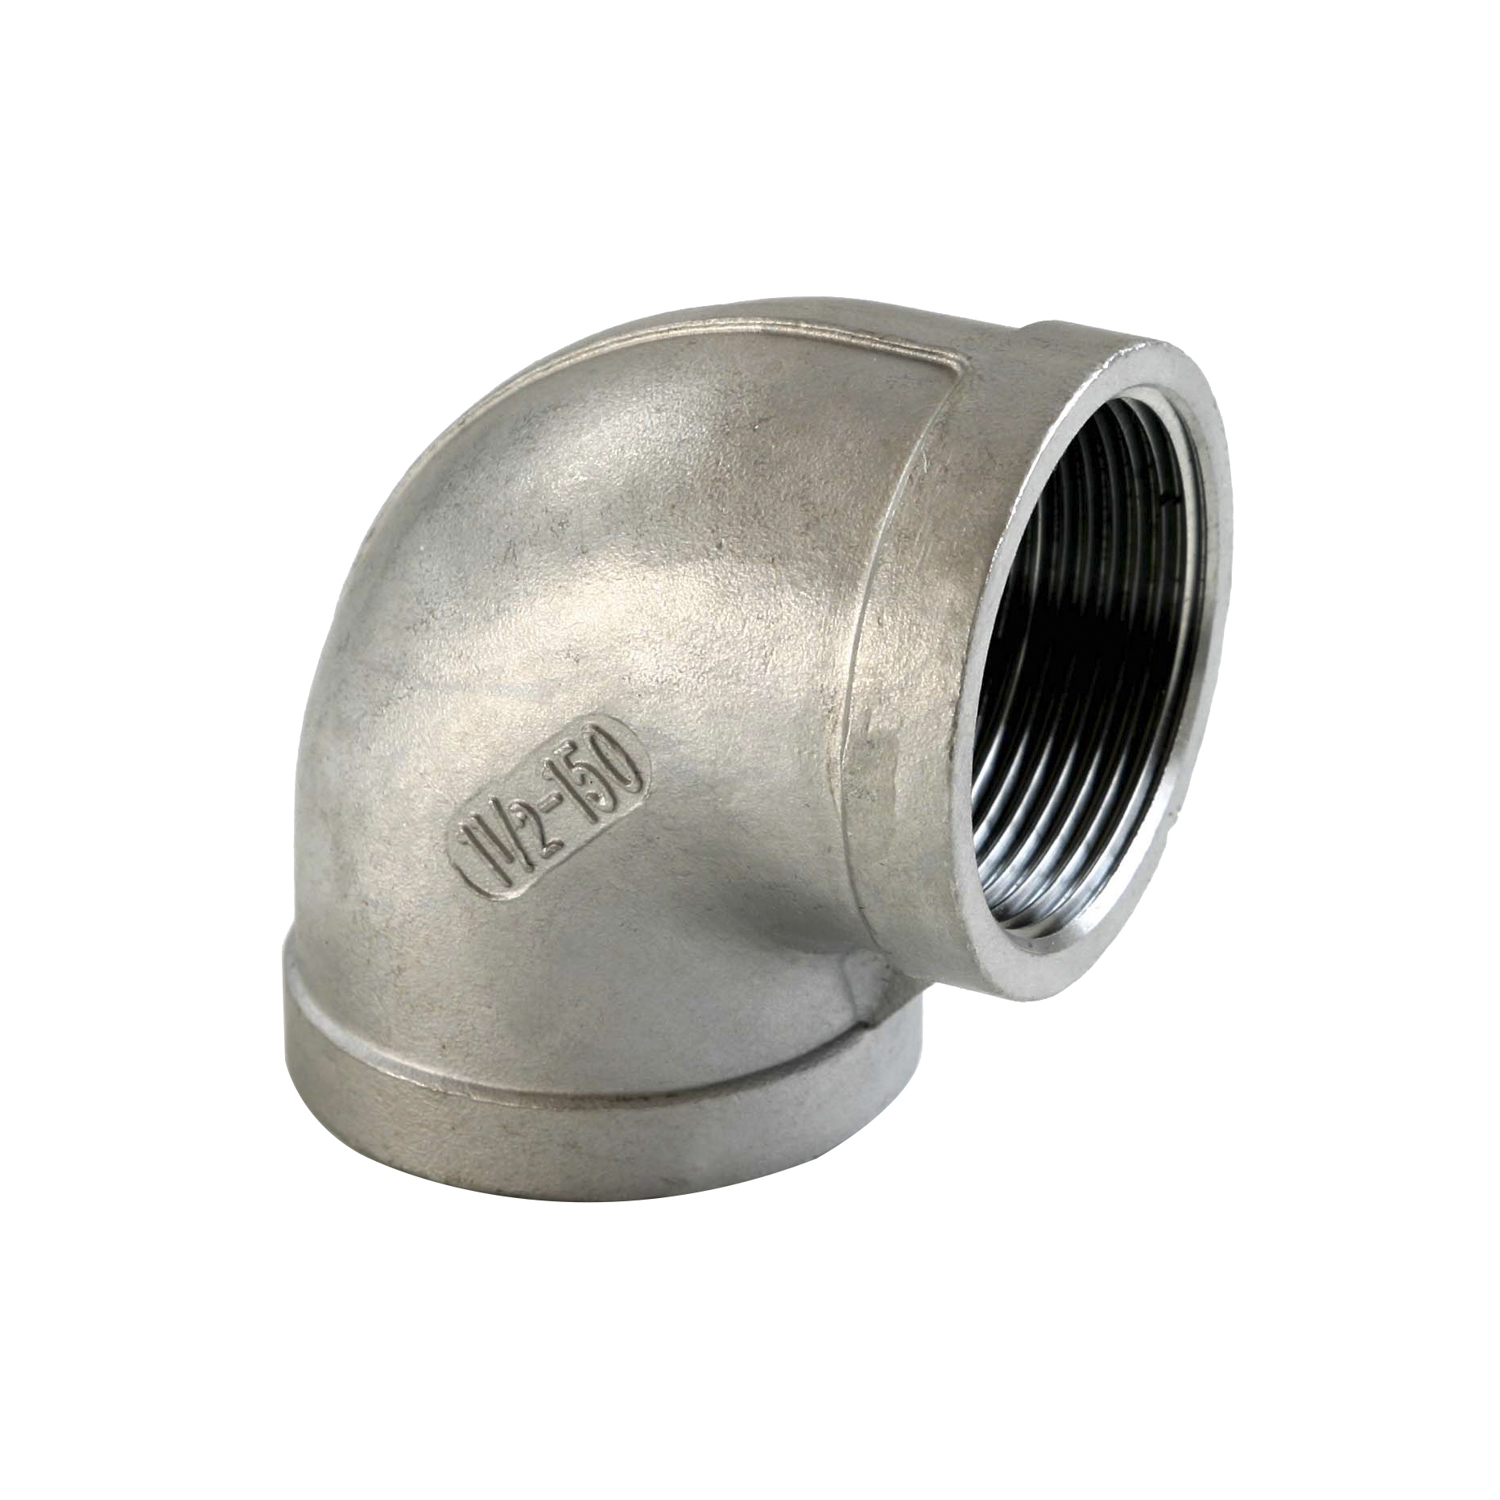 Stainless Steel 90 Degree Elbows with BSP/NPT Thread